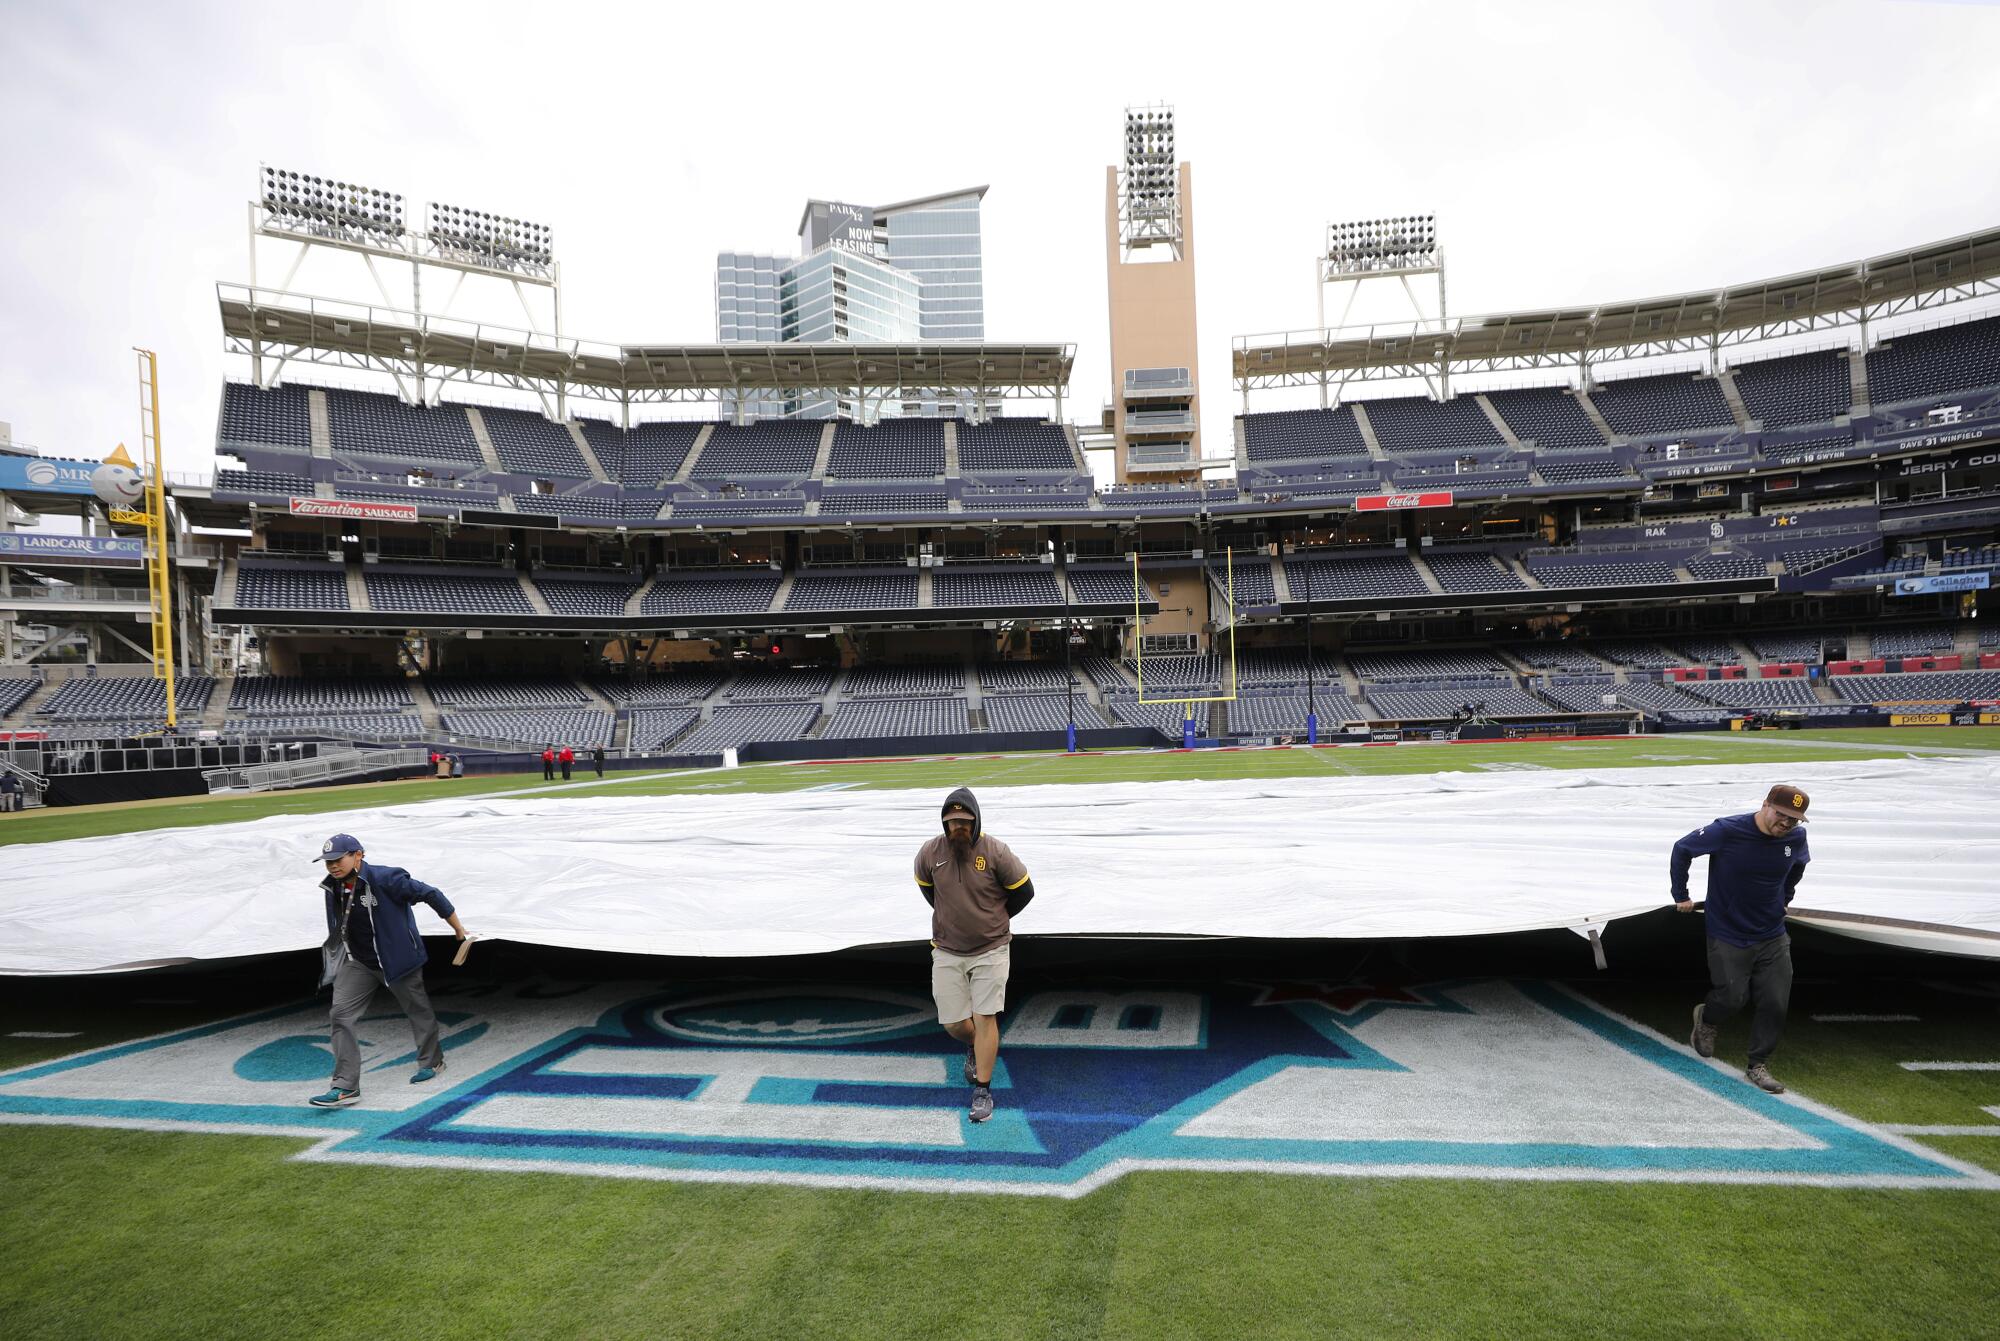 Workers cover the field with a tarp at Petco Park after the Holiday Bowl was cancelled. Rain was expected for the evening